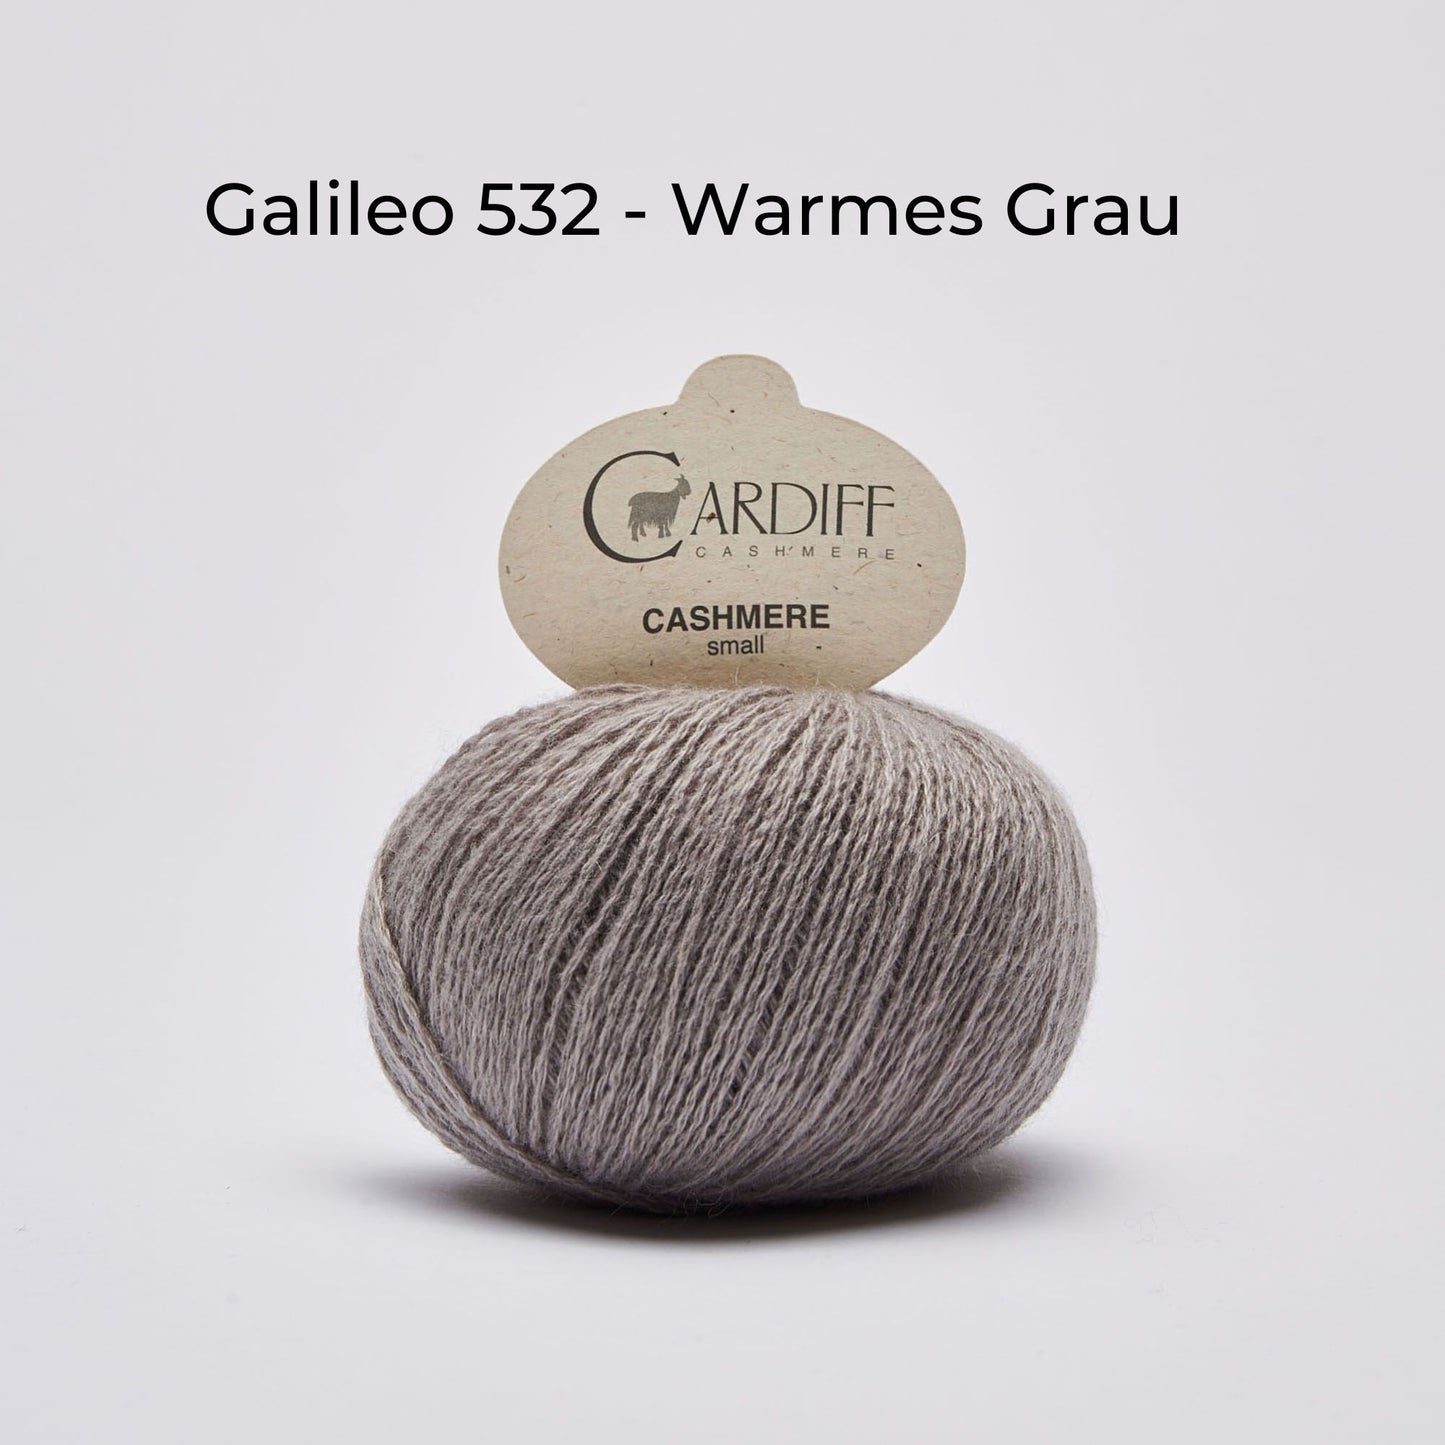 Kaschmirwolle - Cardiff Cashmere Small 4/28 - NS 2.5-3.5 mm